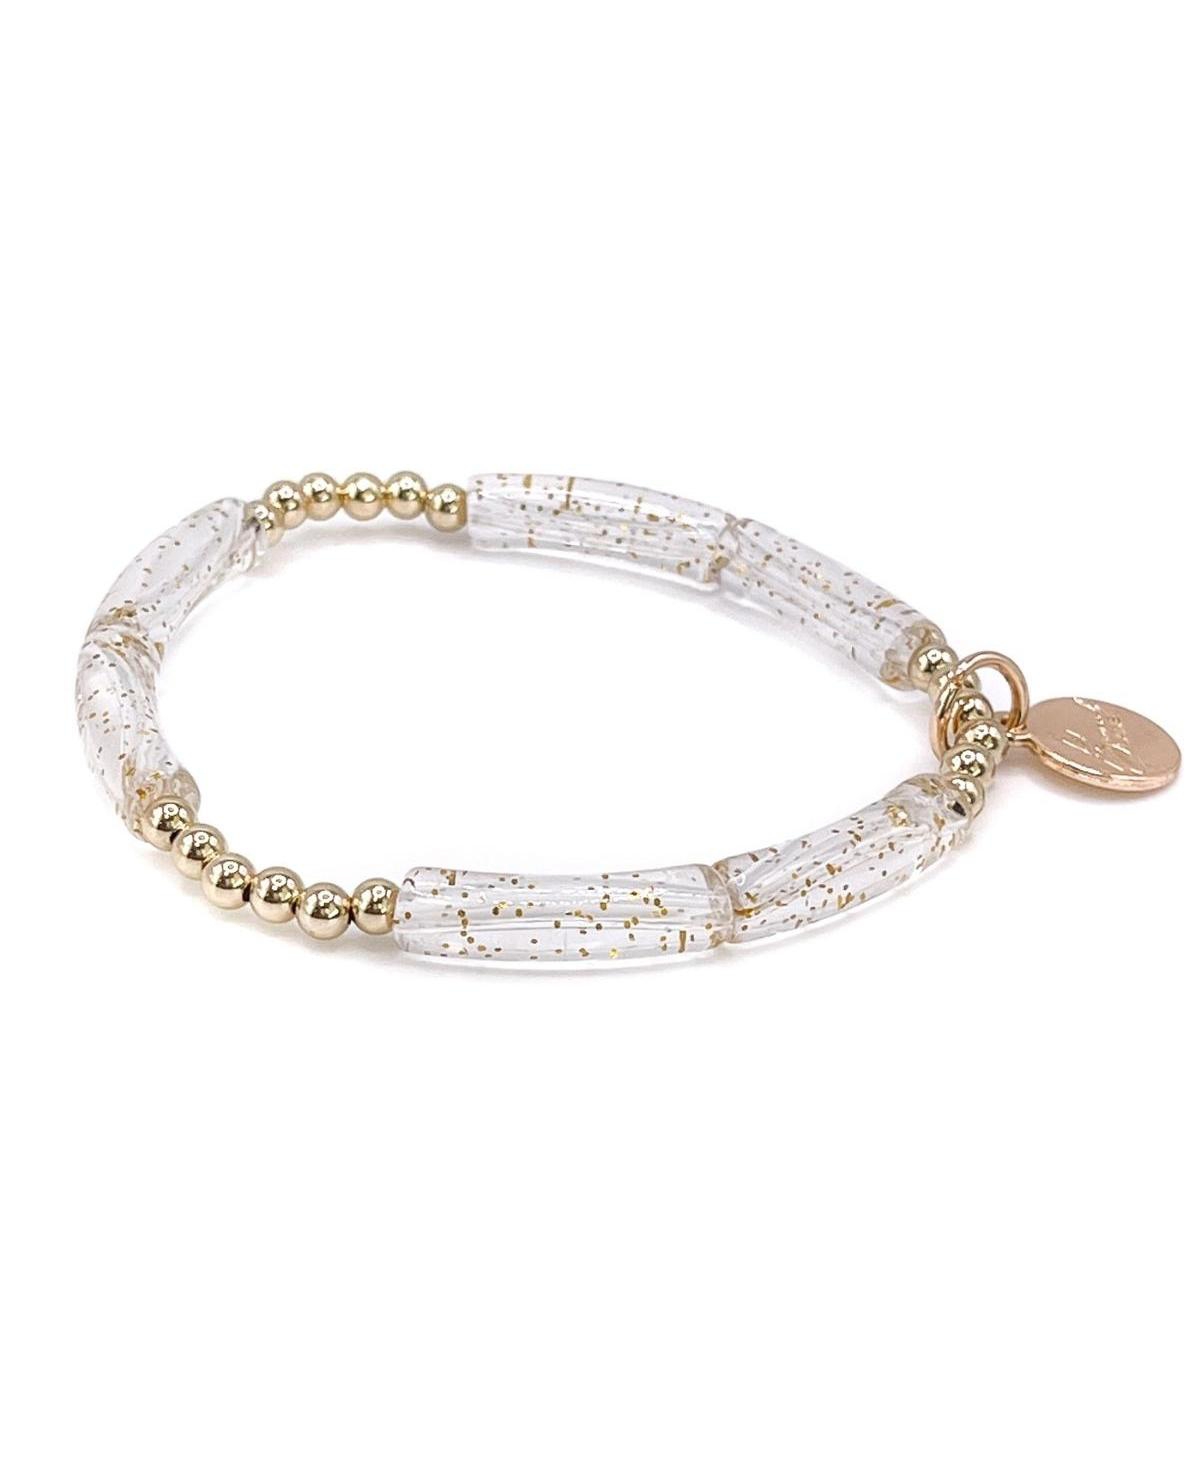 Non-Tarnishing Gold filled, 4mm Gold Ball and Acrylic Stretch Bracelet - Clear with glitter